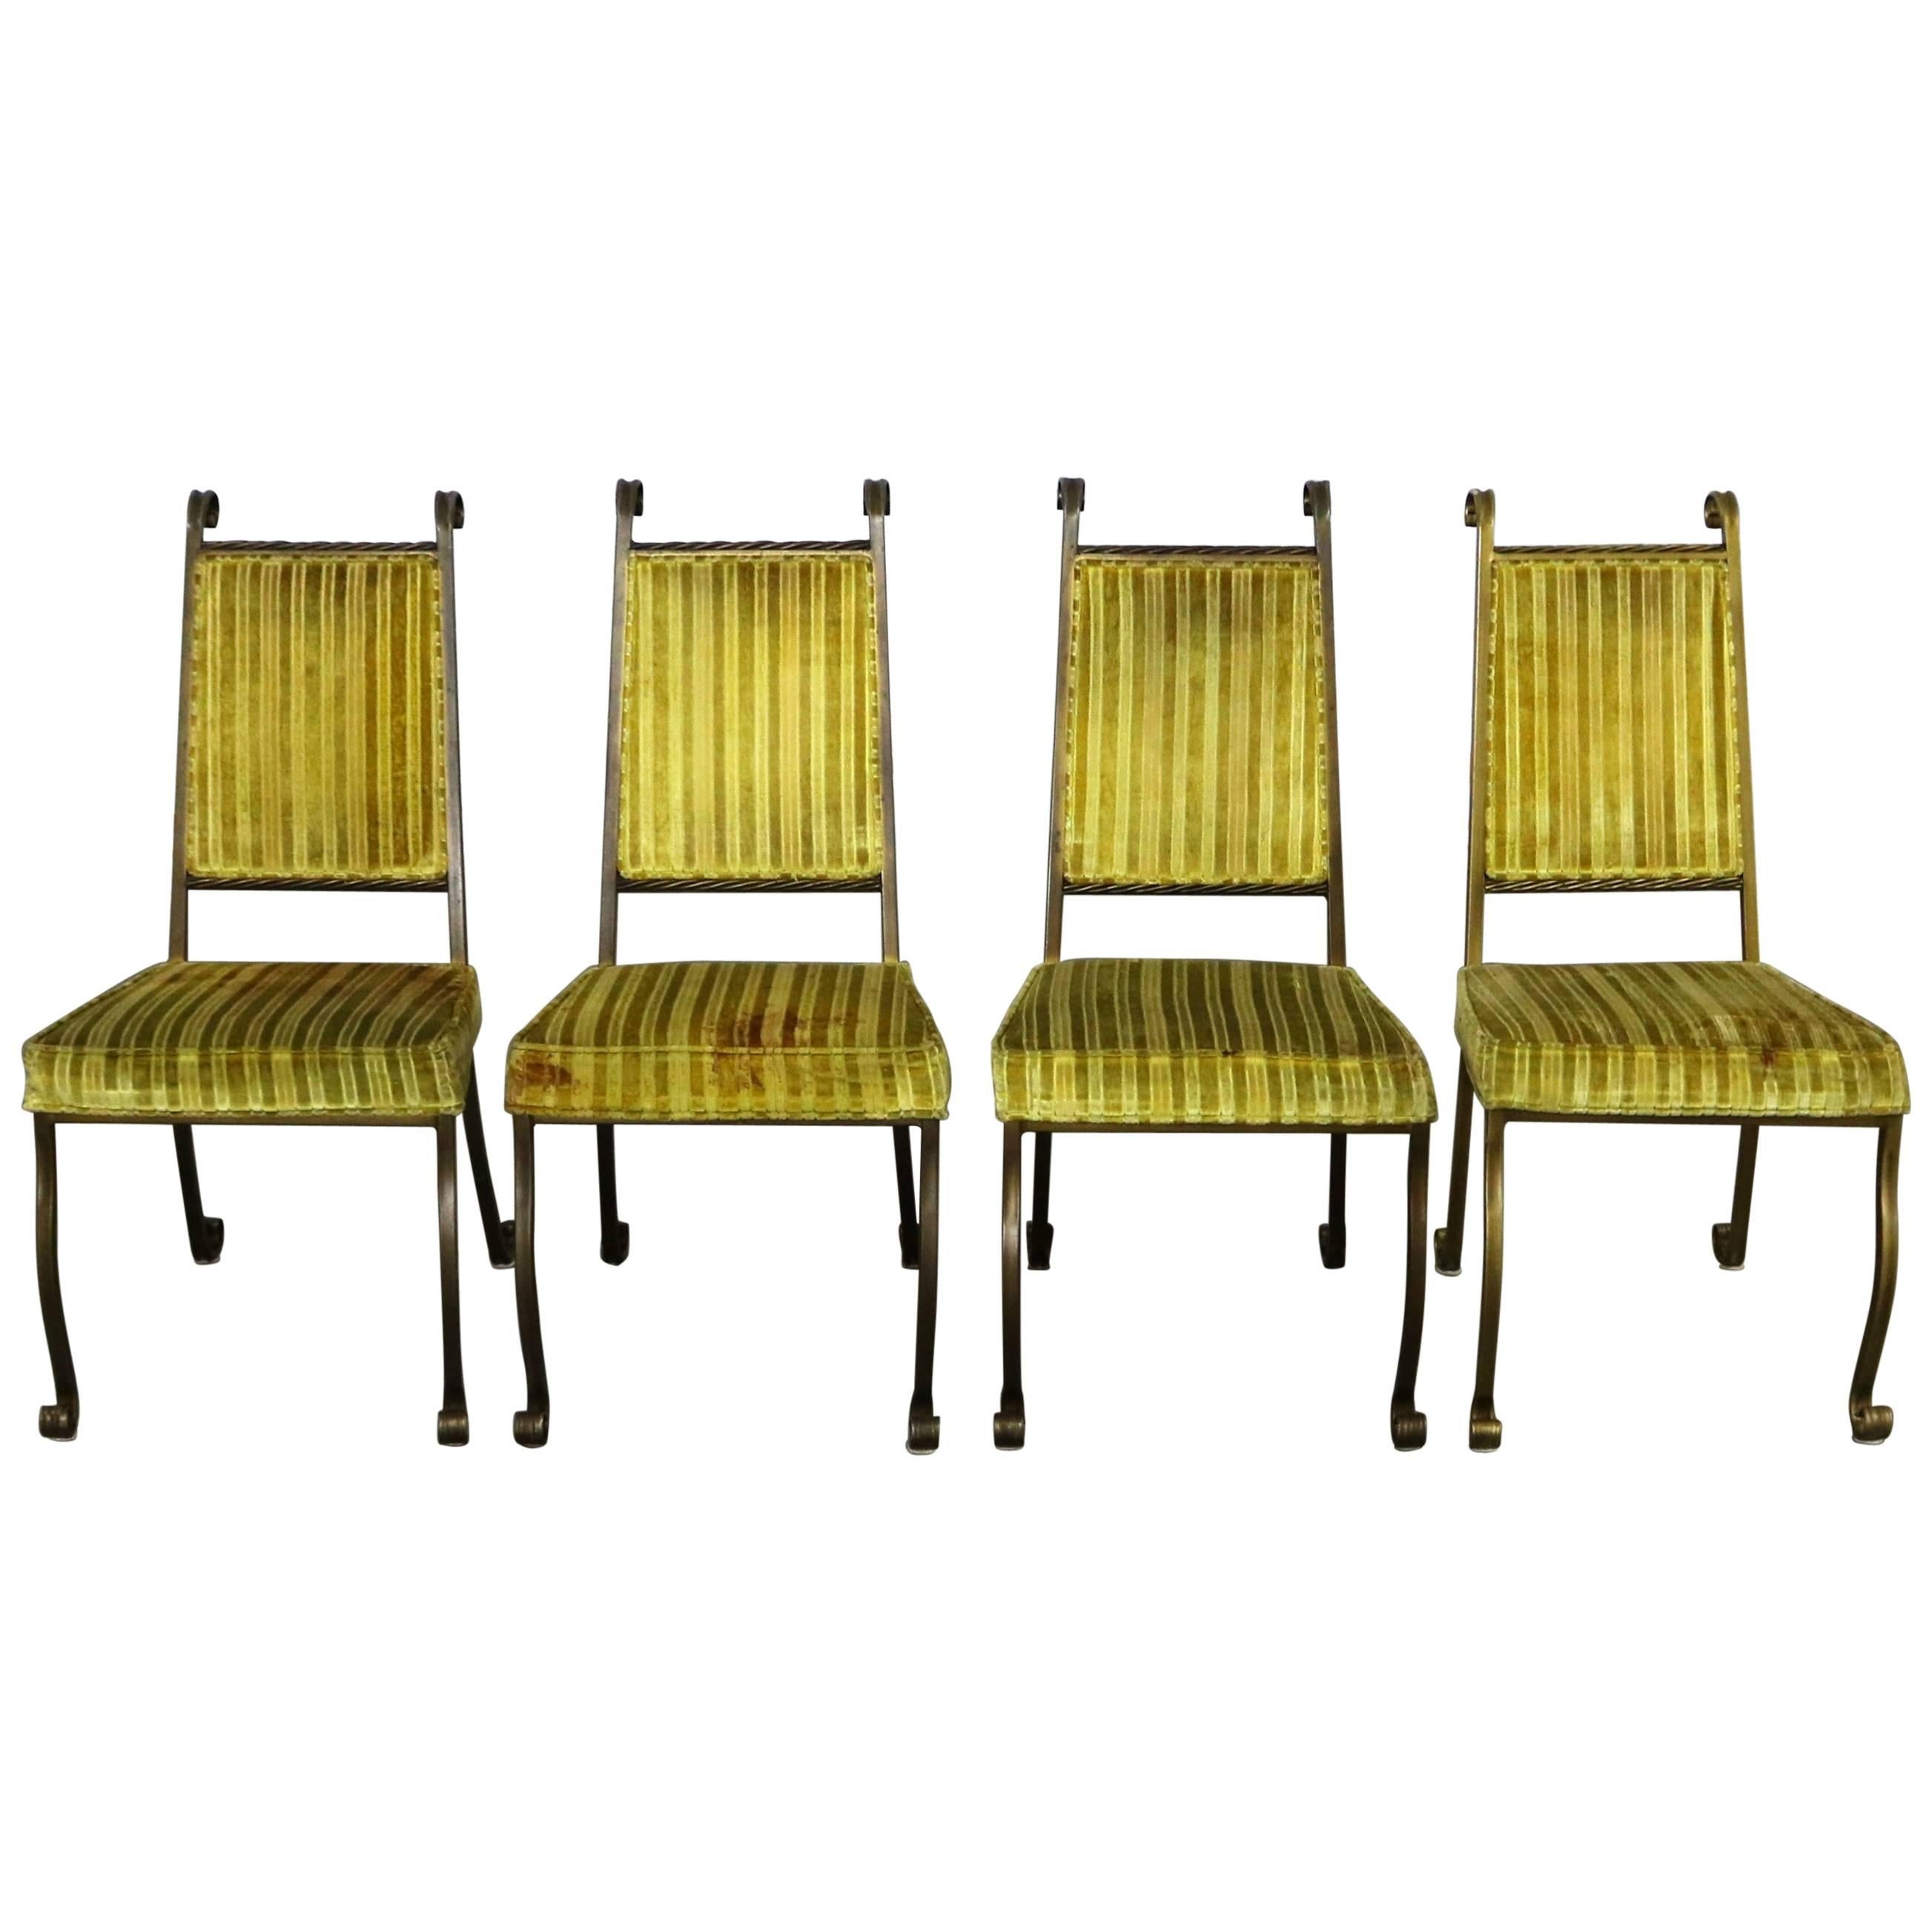 Four Hollywood Regency Wrought Iron Dining Chairs by Swirl Craft of Sun Valley For Sale